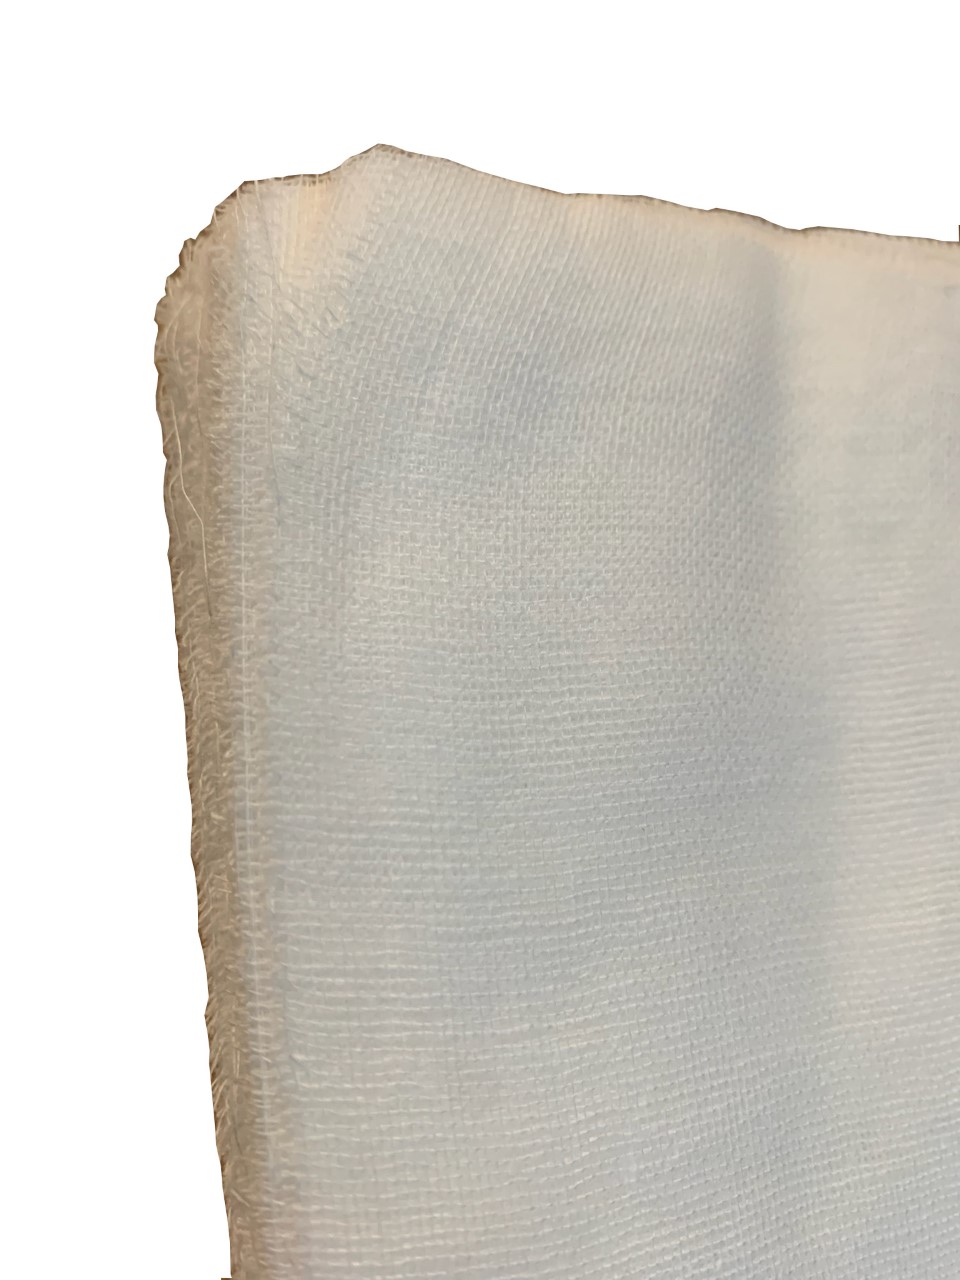 16" x 16" Grade 60 Cheesecloth Bleached Squares 100 Pk